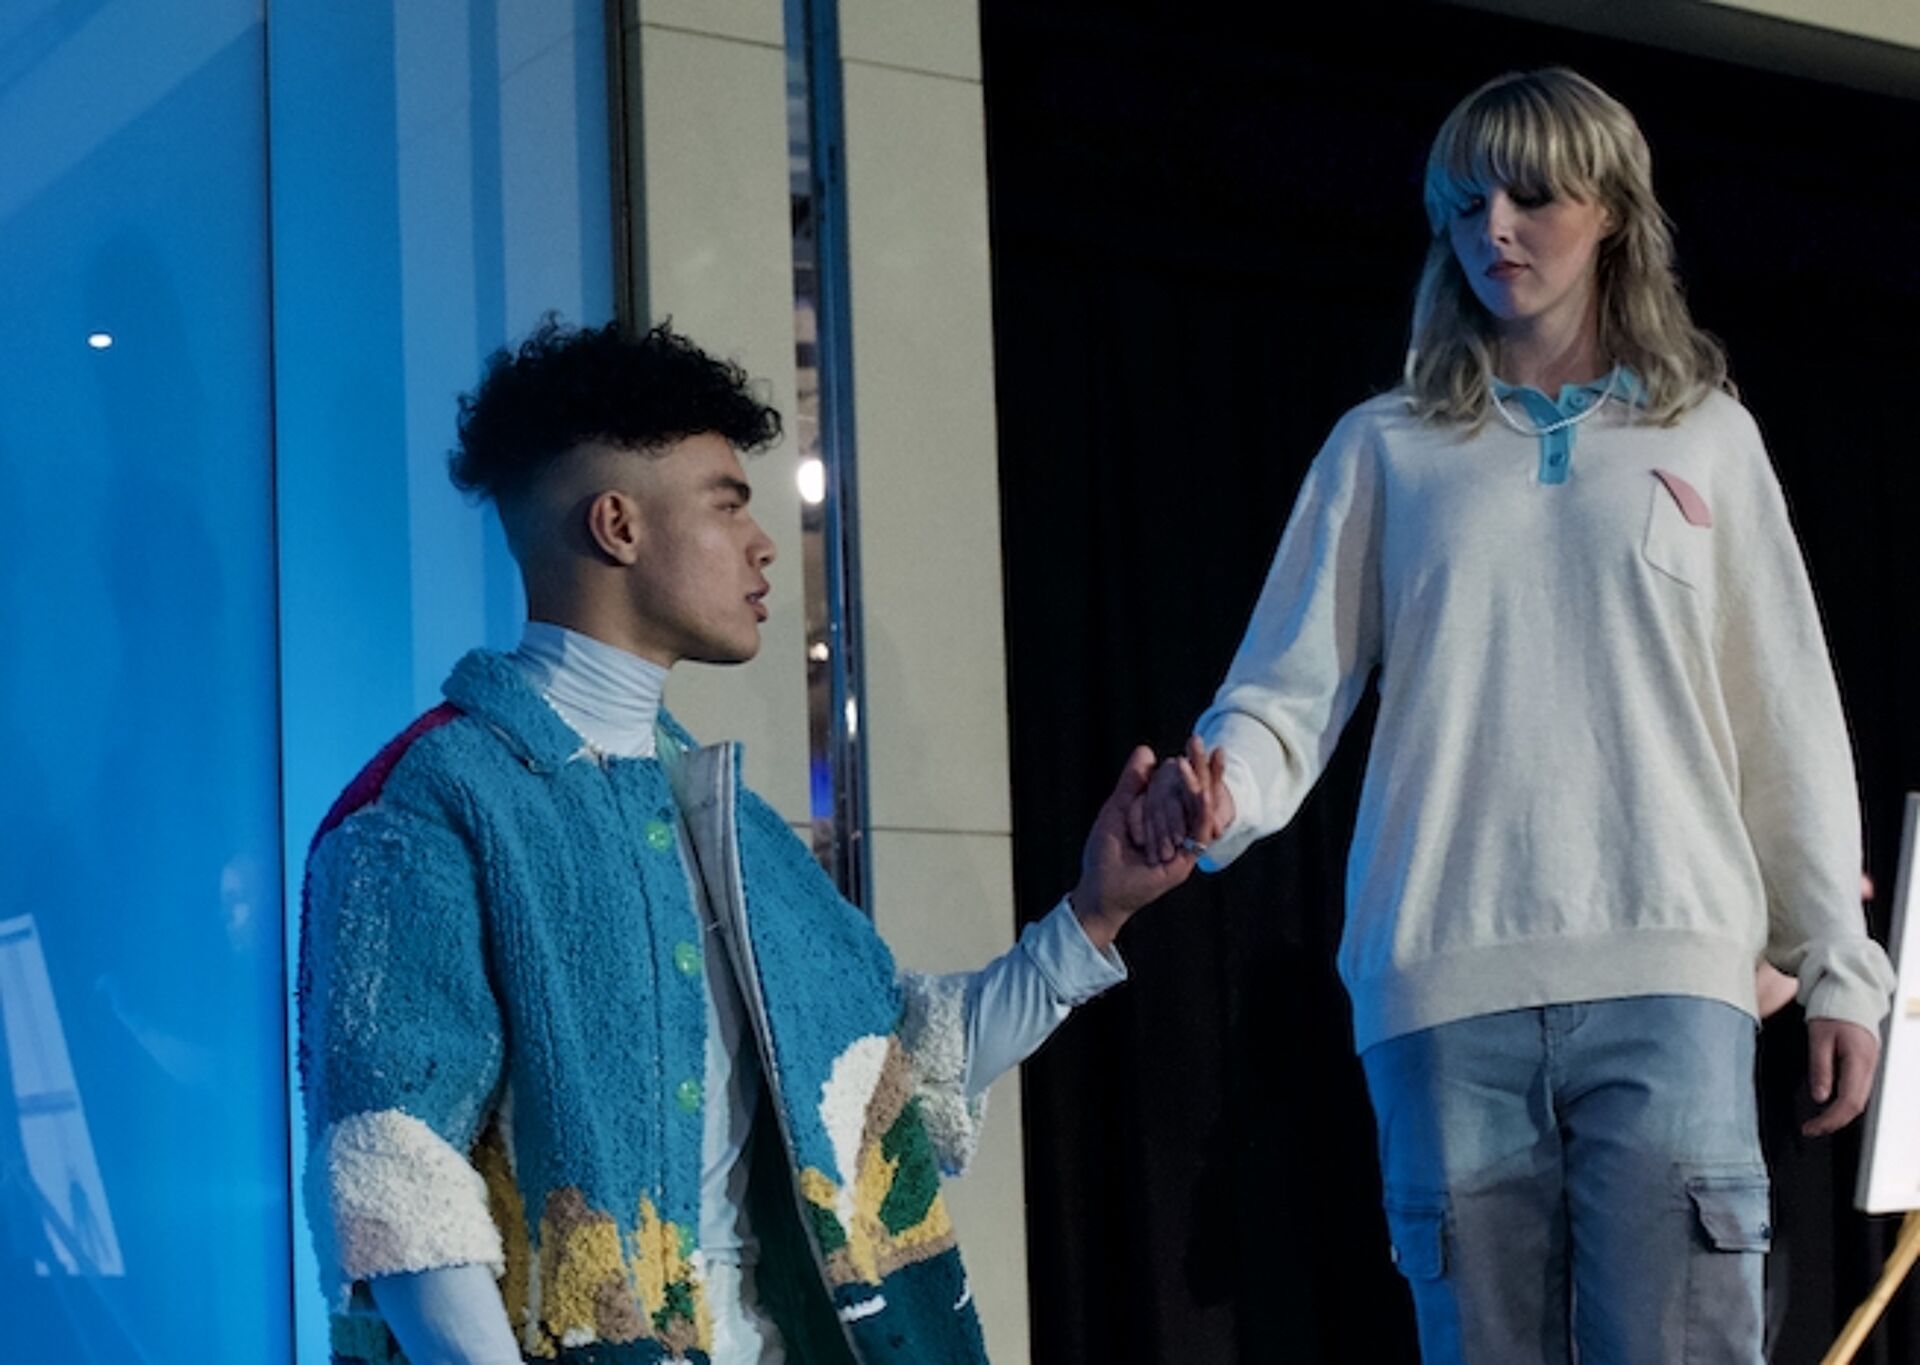 Two models connect in a dynamic pose, showcasing modern casual wear with a colorful, textured jacket and relaxed sweater.